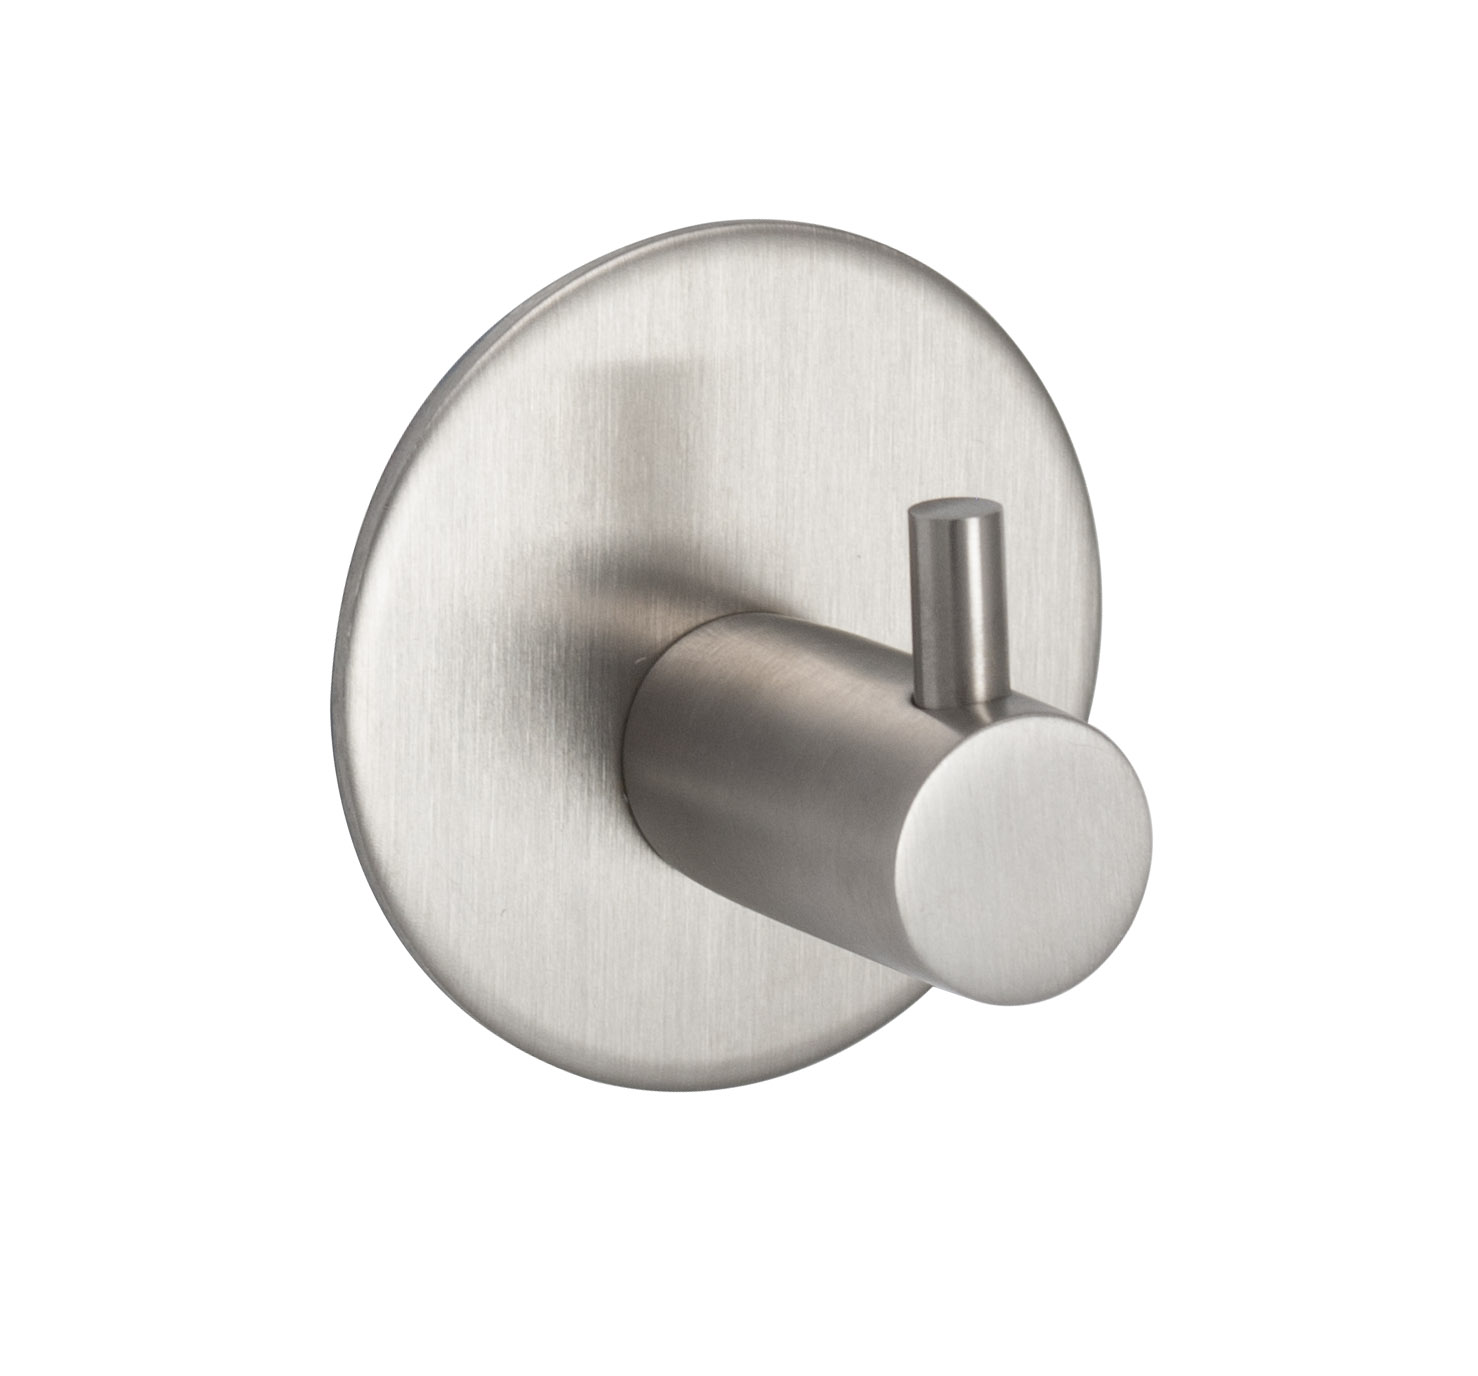 Stainless Steel Single Contemporary Self-Adhesive Coat Hook - Eclipse